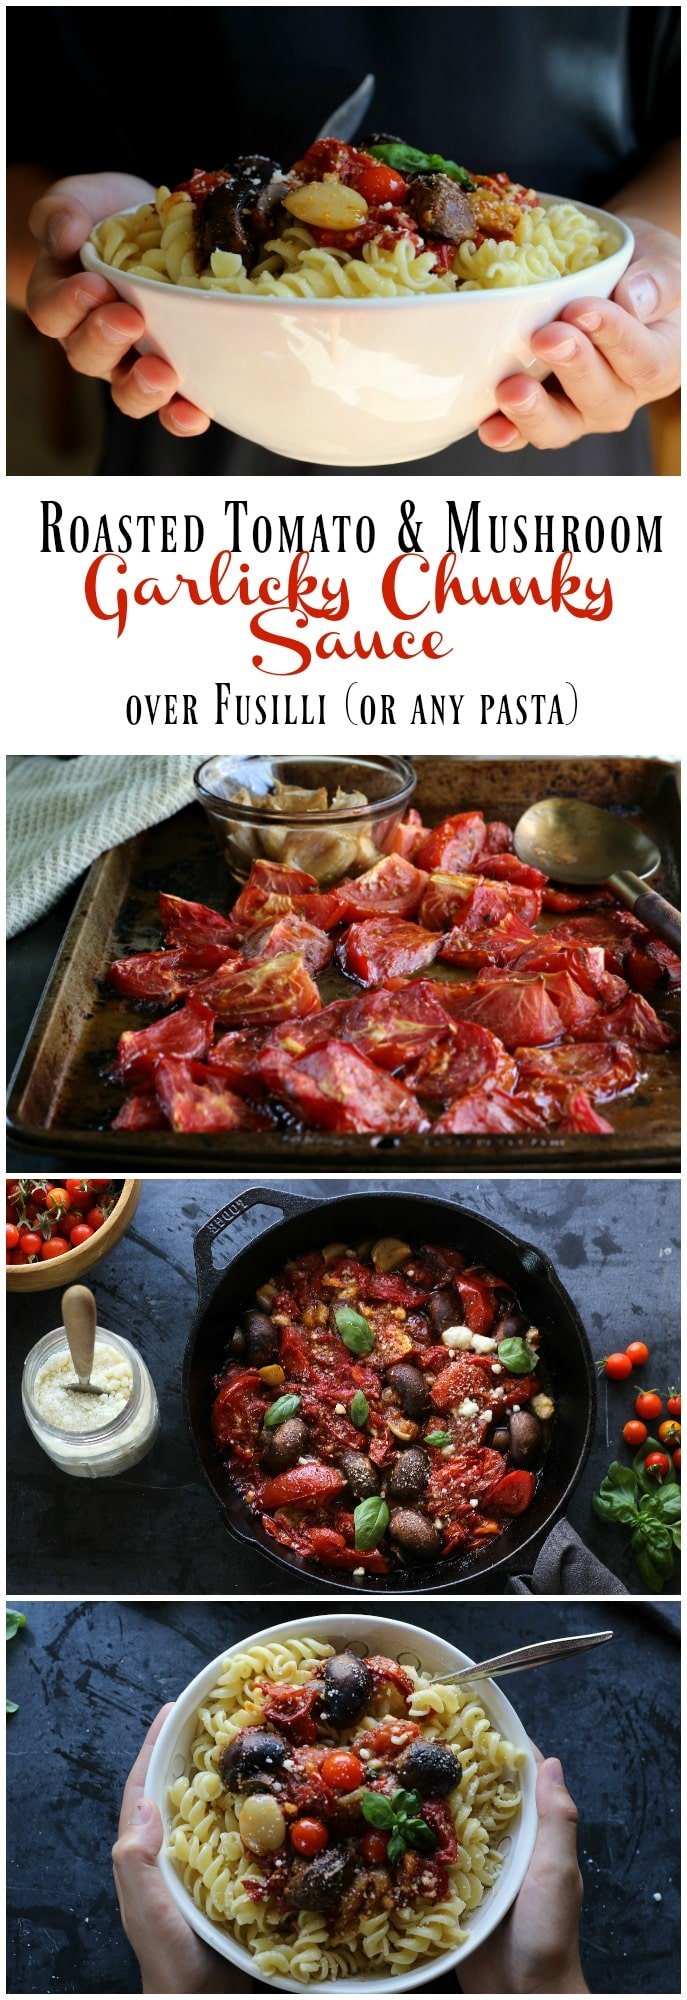 Add a whole lot of flavor to simple dishes with this easy #Paleo and #Glutenfree Roasted Tomato & Mushroom Garlicky Chunky Sauce | gardeninthekitchen.com